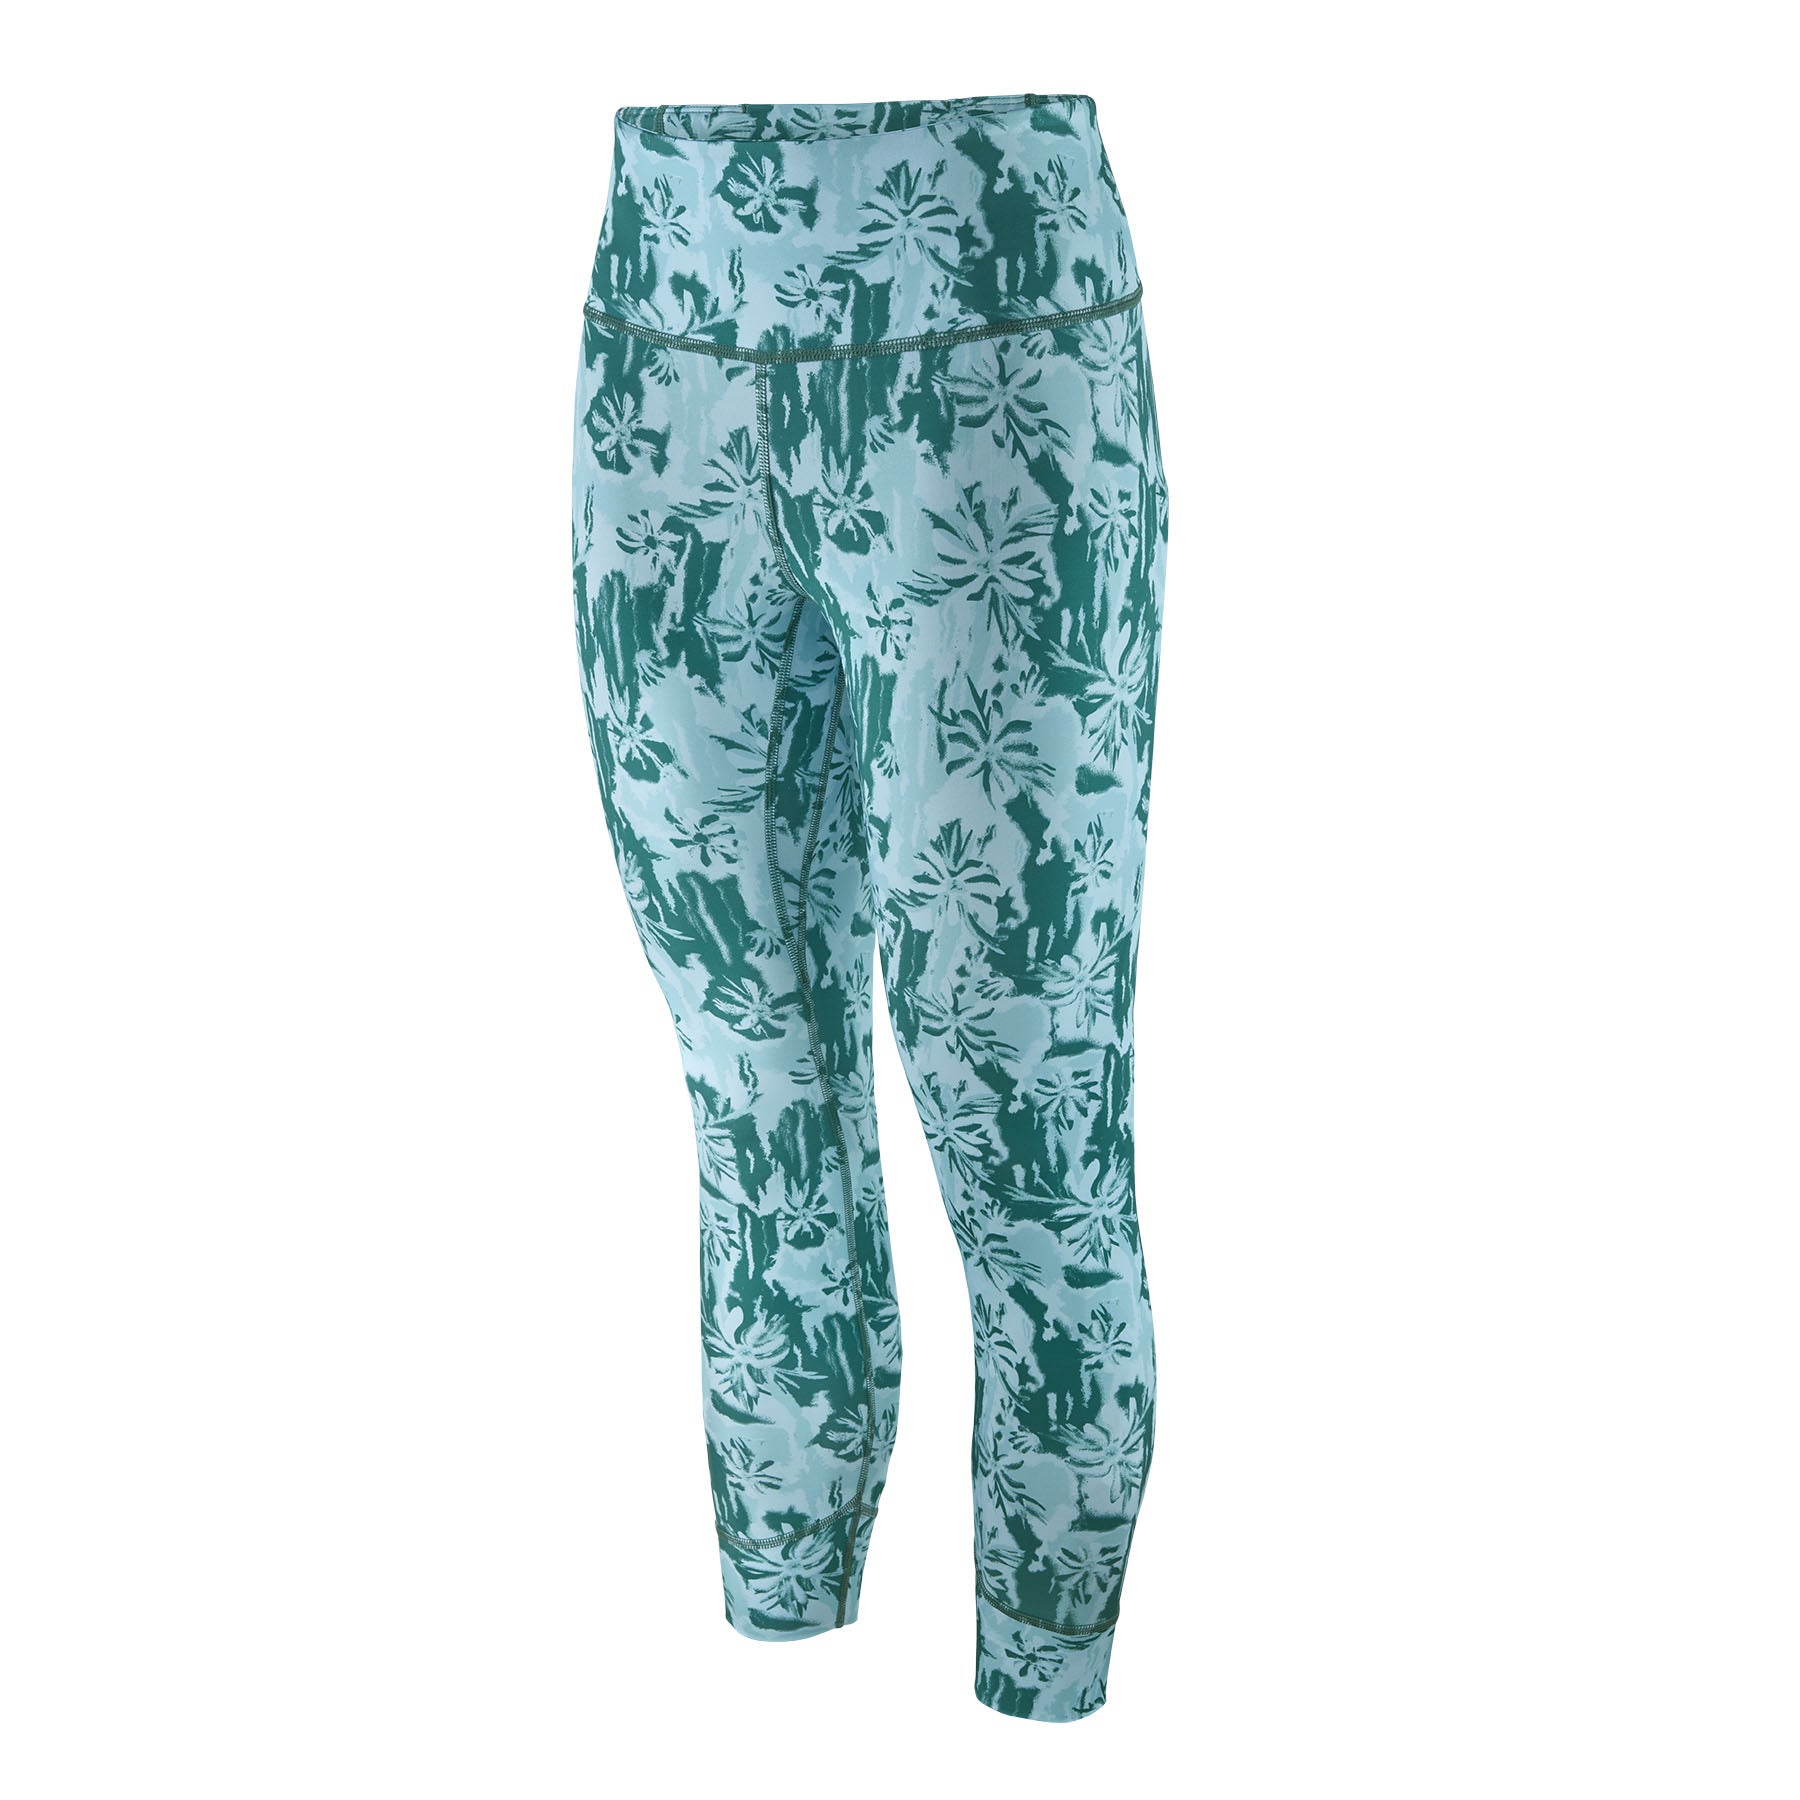 Women's Clothing Tagged Pants/Shorts - Fin & Fire Fly Shop